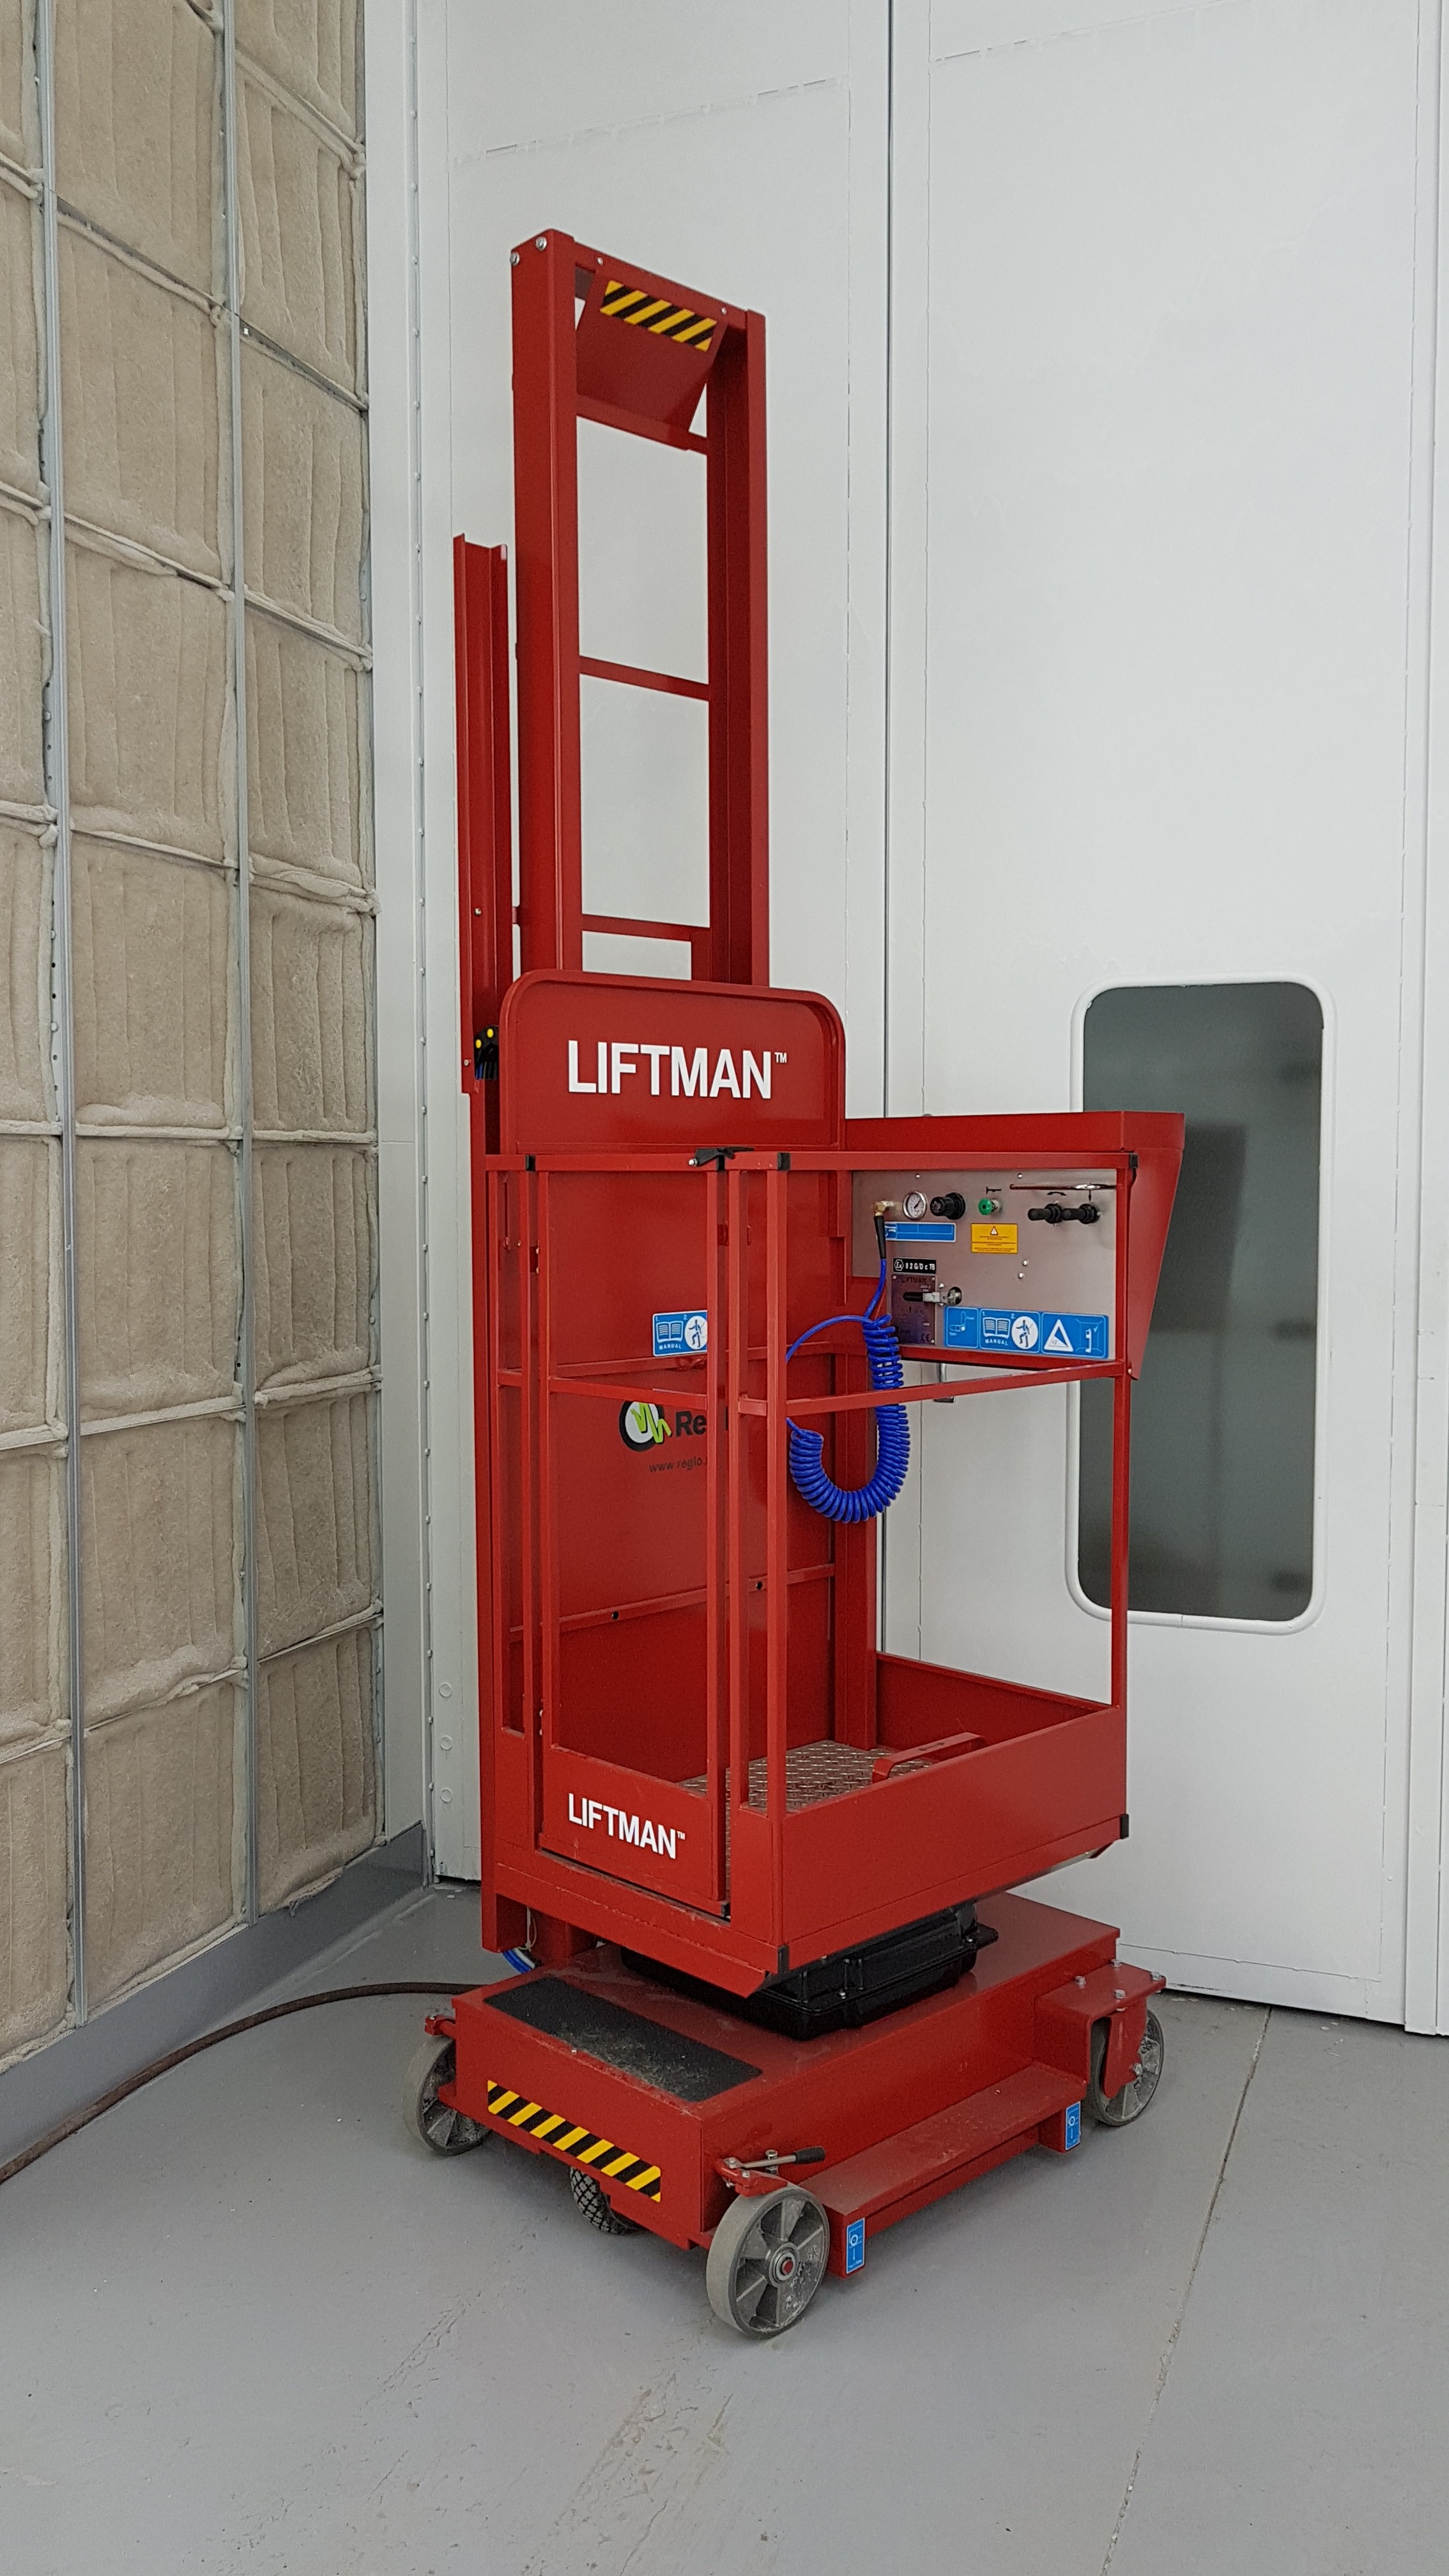 Liftman for preperation booths